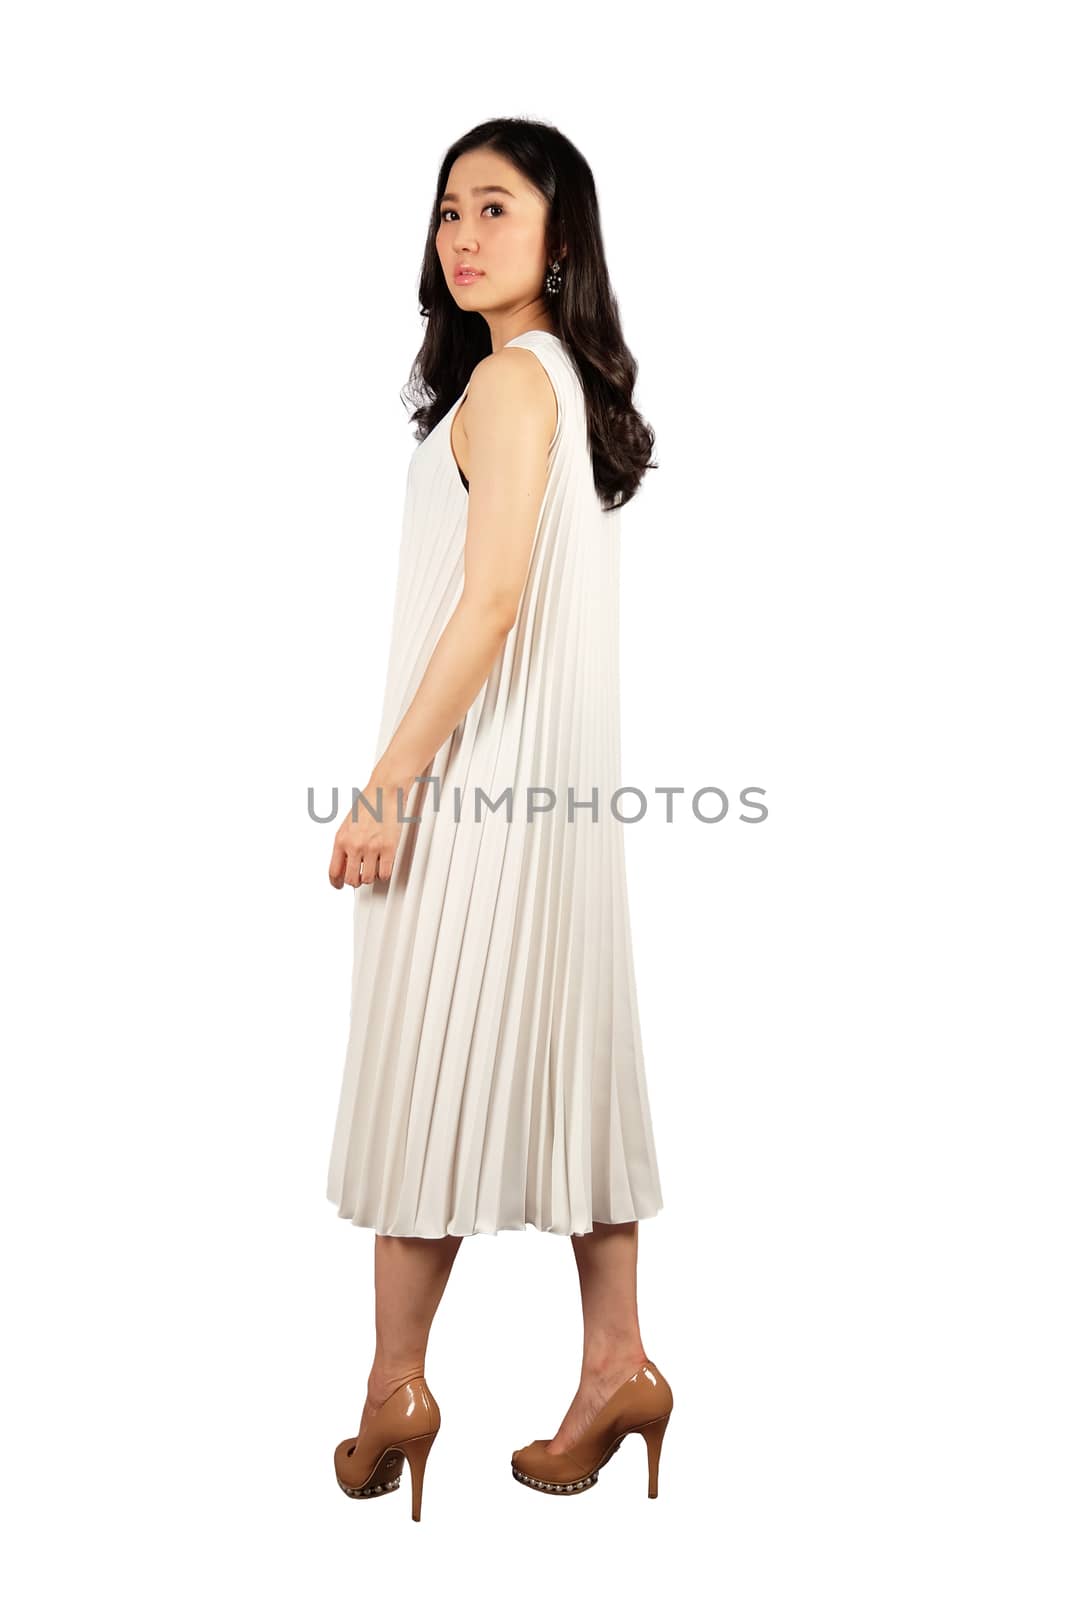 Young asian woman in white dress looking at the camera on white  by Surasak